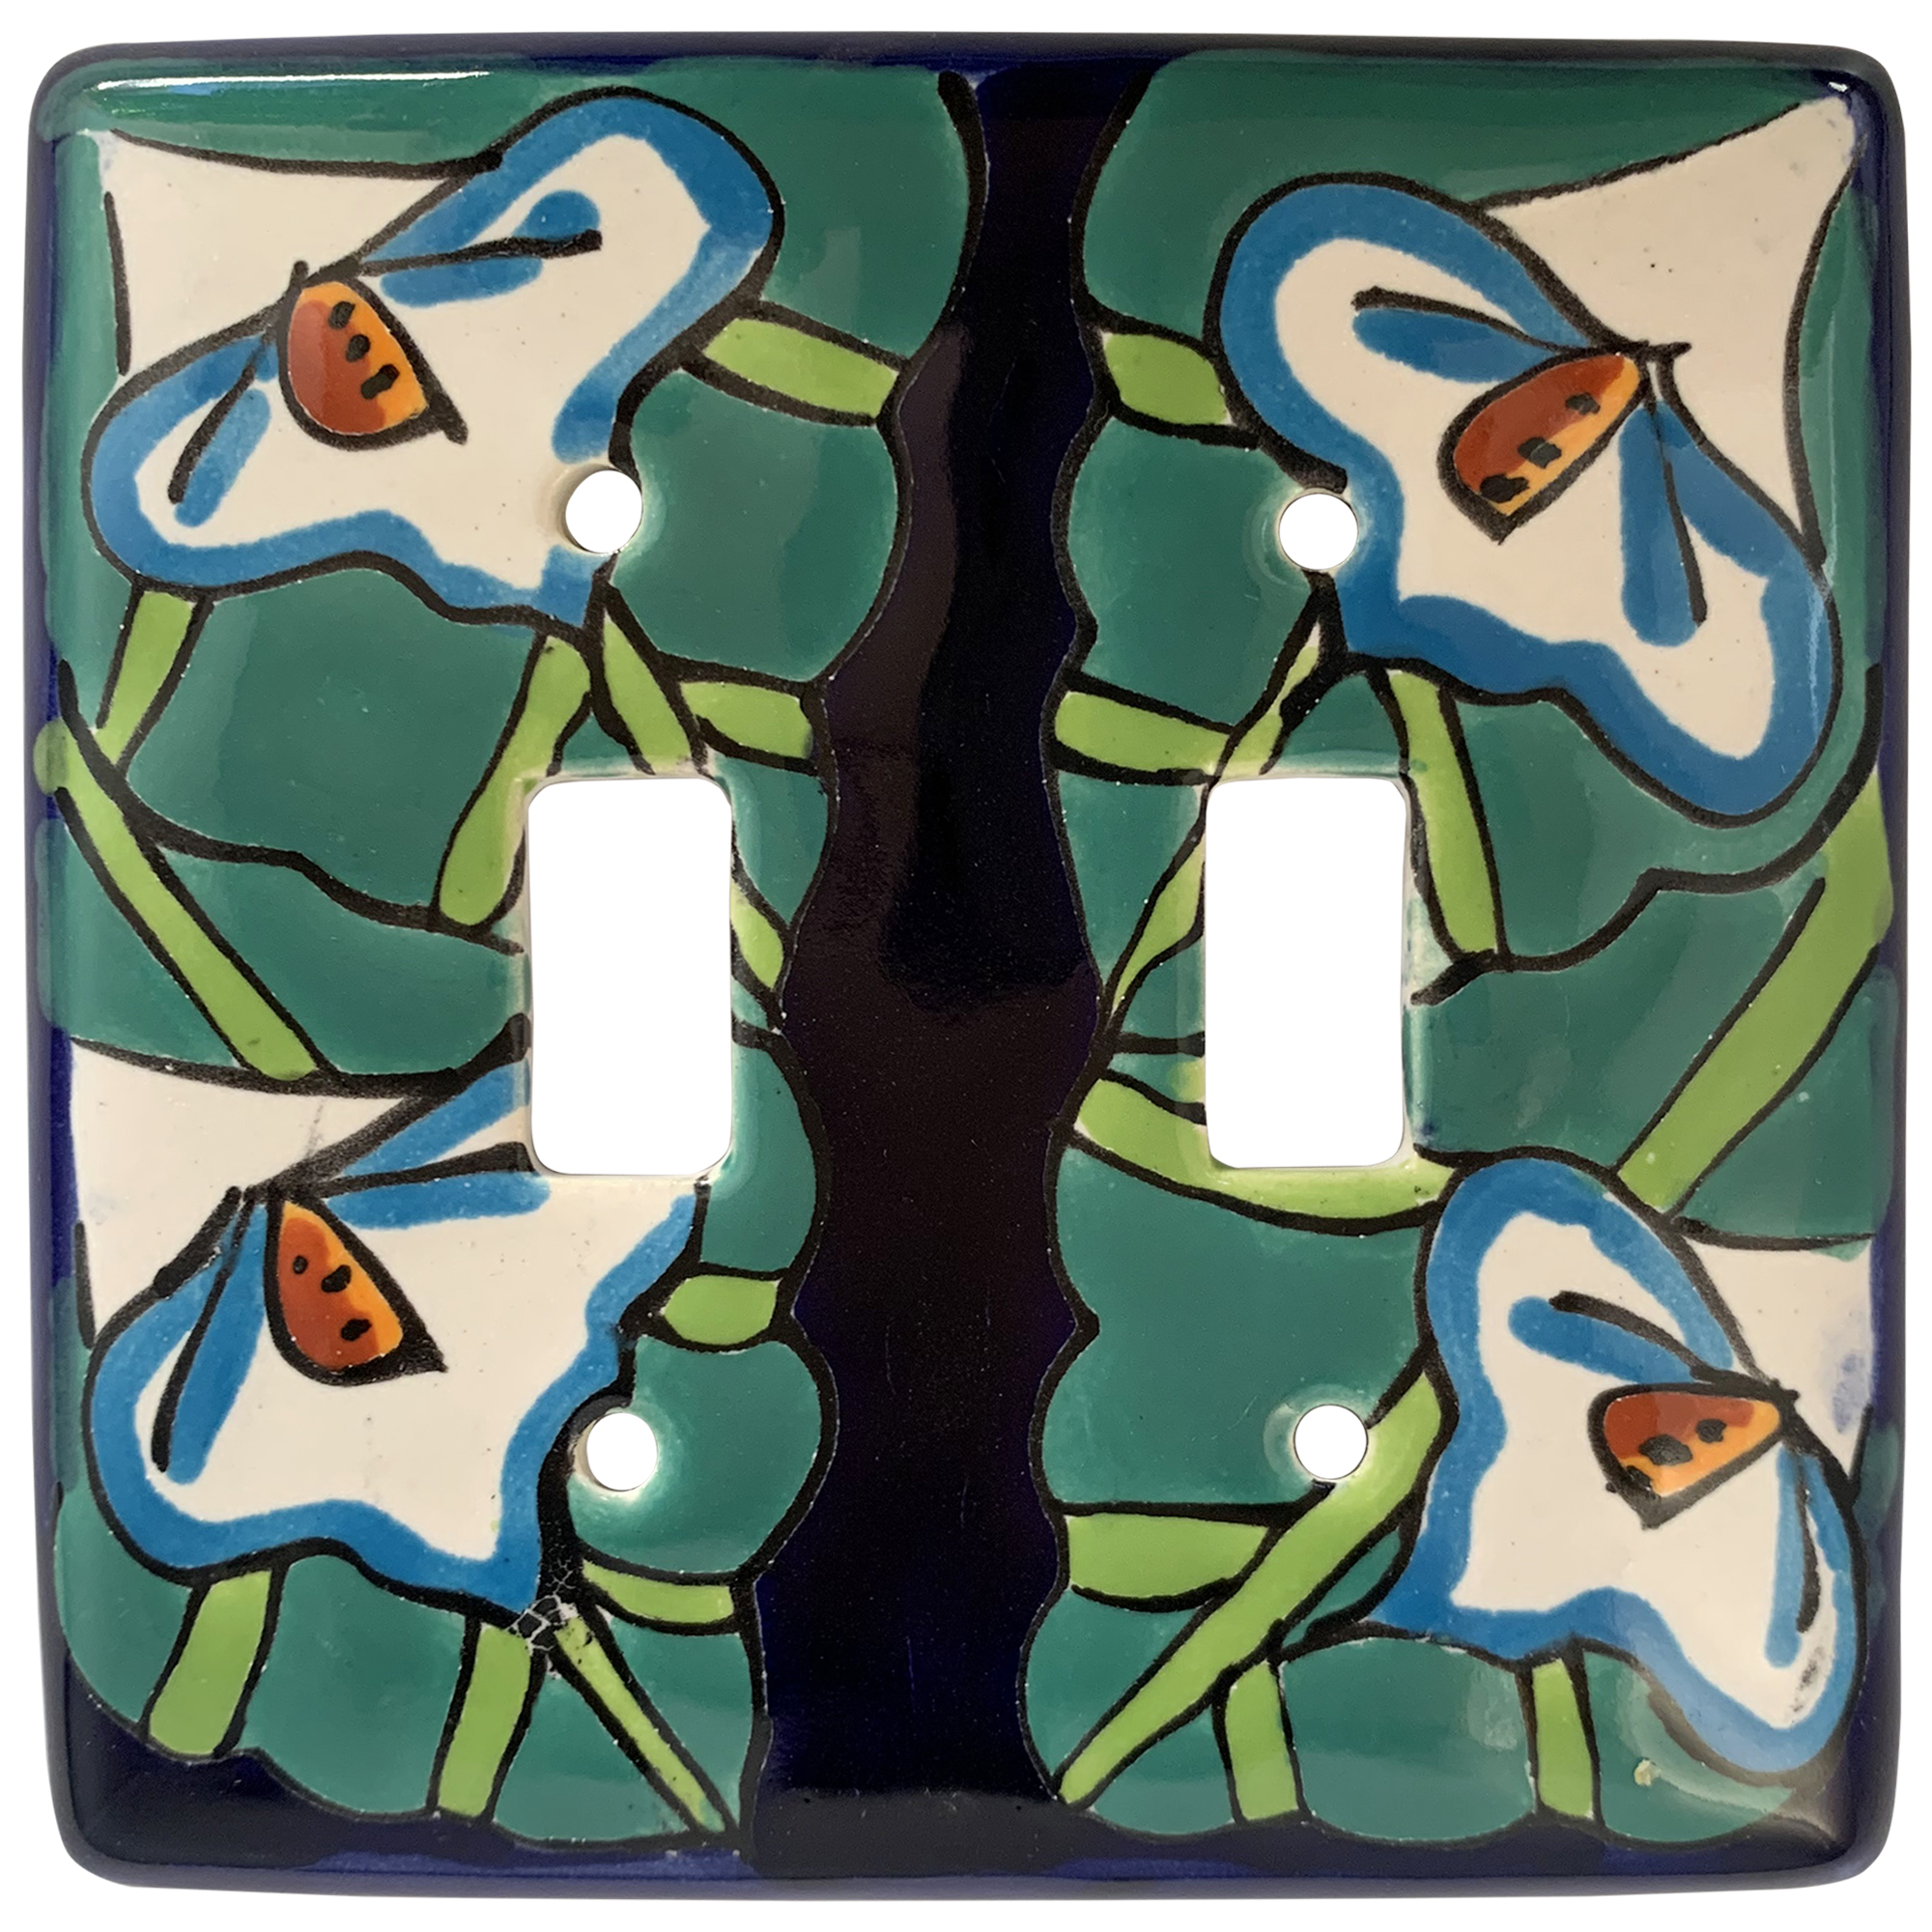 TalaMex Lily Double Toggle Mexican Talavera Ceramic Switch Plate